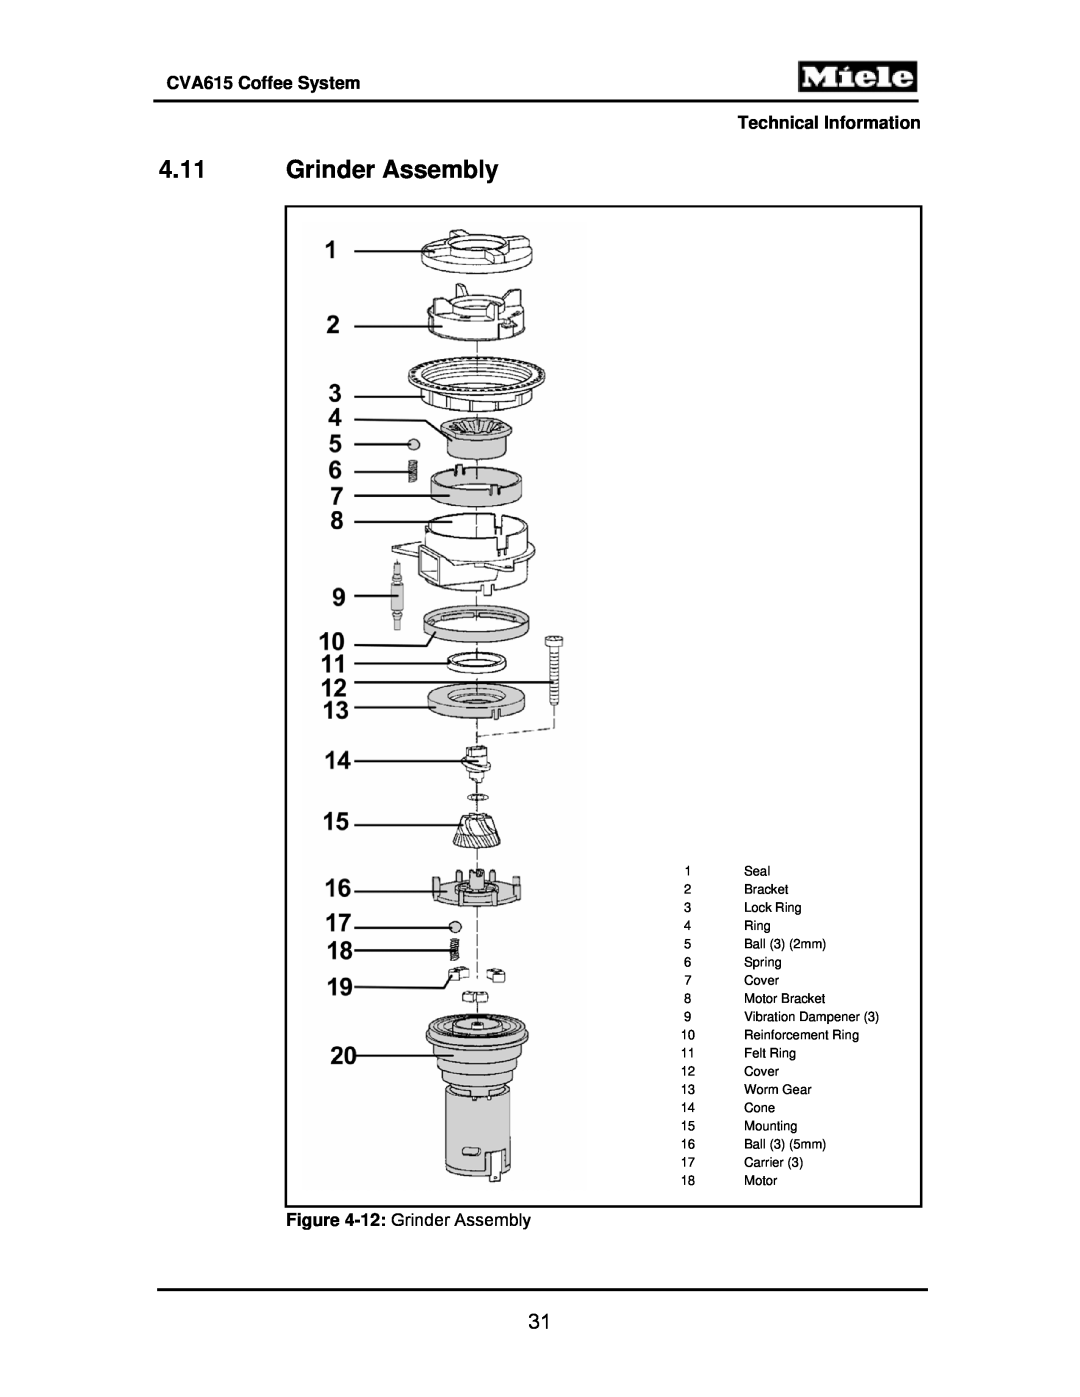 Miele manual 4.11Grinder Assembly, CVA615 Coffee System Technical Information, 12: Grinder Assembly 